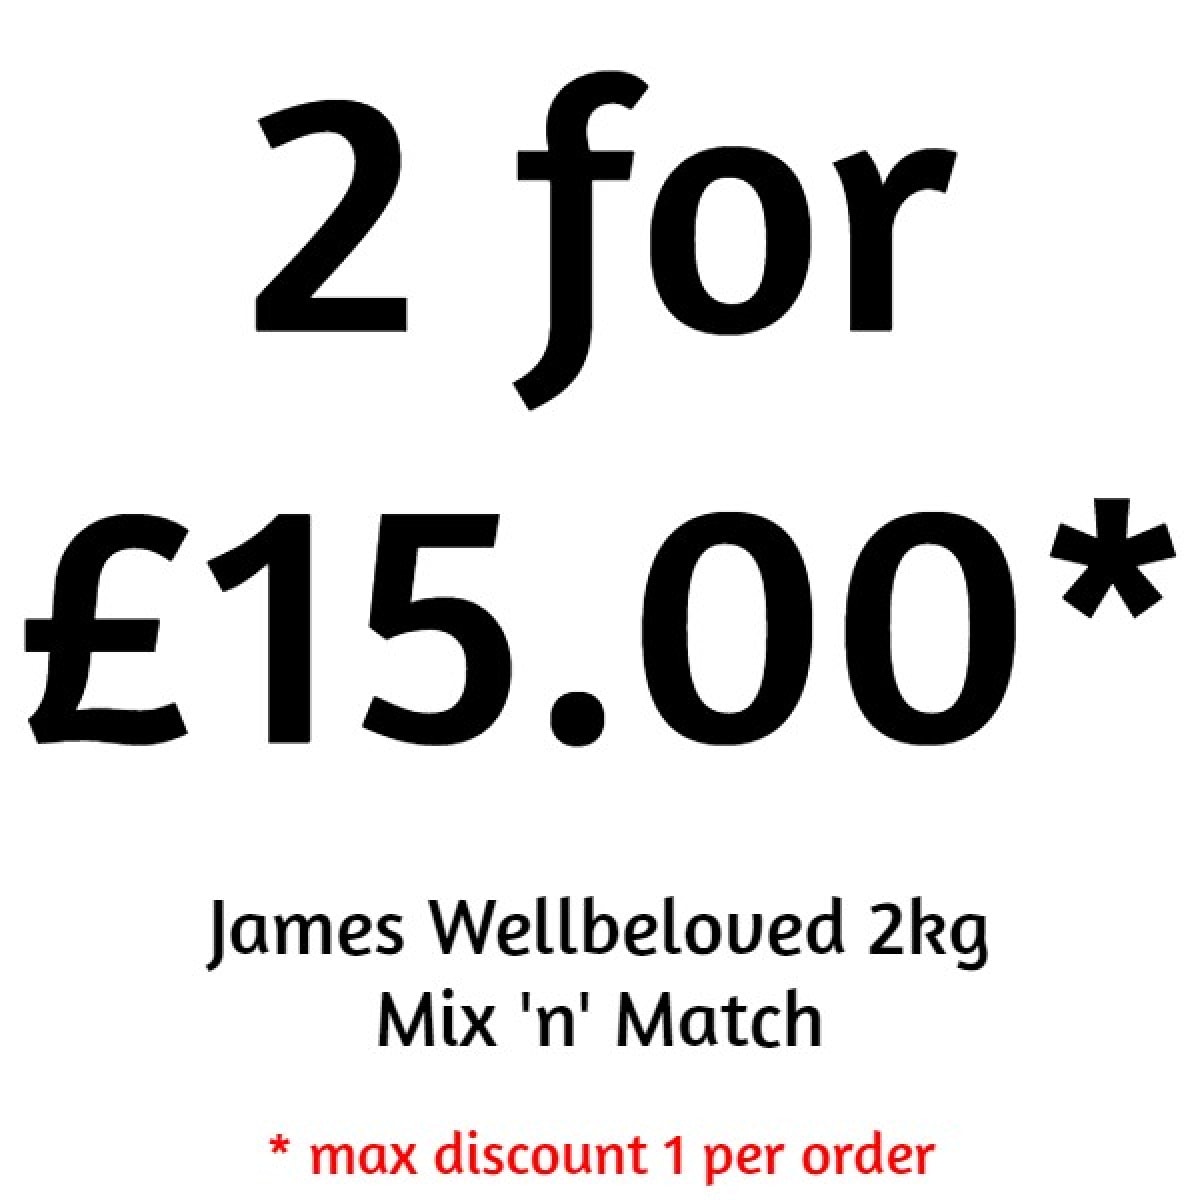 James Wellbeloved – Fish Adult 2kg – Pawfect Supplies Ltd Product Image